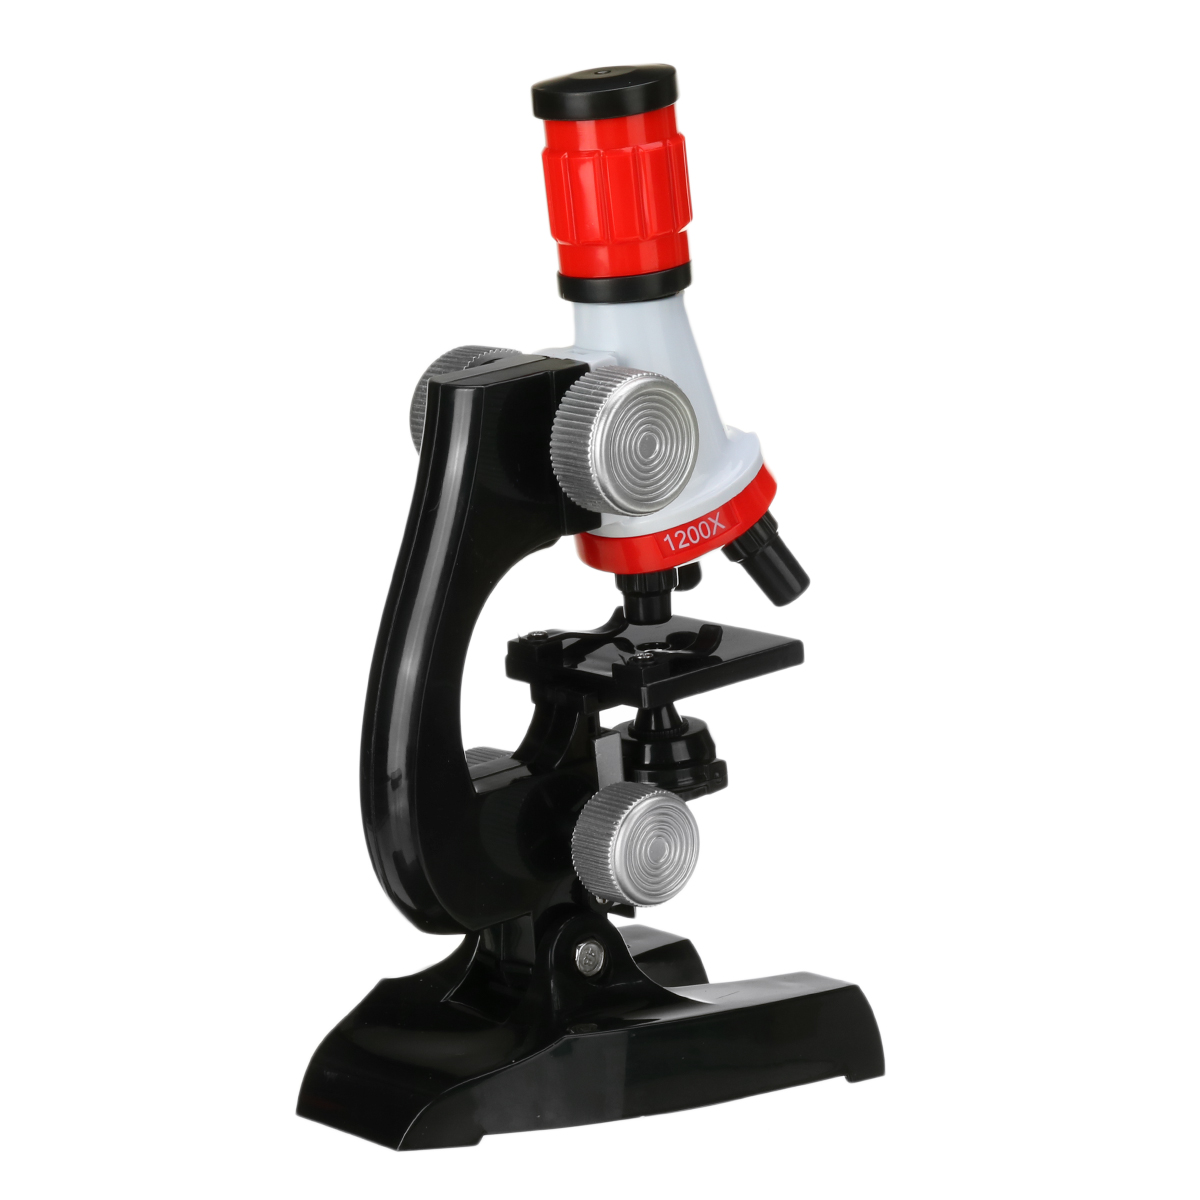 Children-Biological-Microscope-Kit-Lab-LED-100X-400X-1200X-Home-School-Science-Educational-Toy-Gift--1903472-9